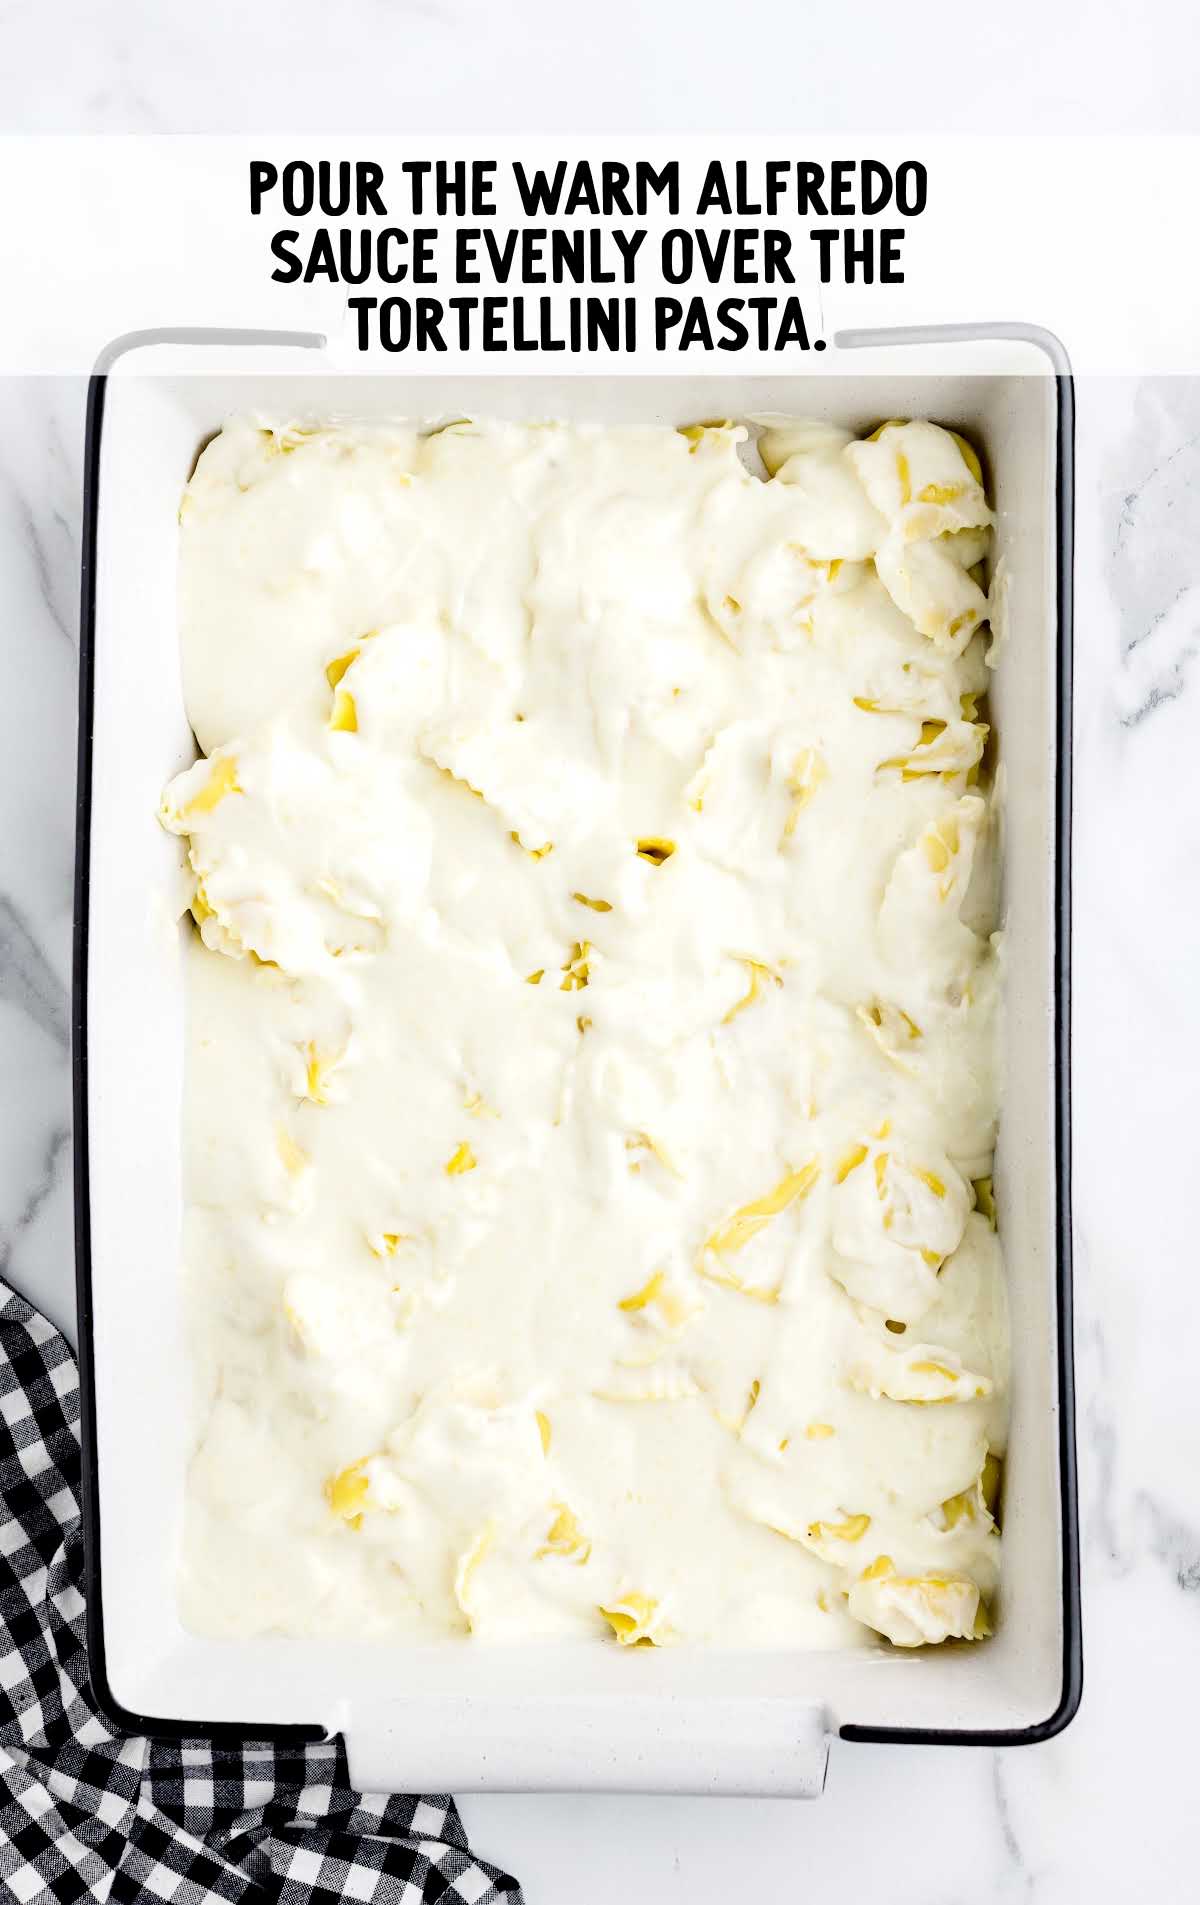 warm alfredo sauce poured over the tortellini pasta in a baking dish